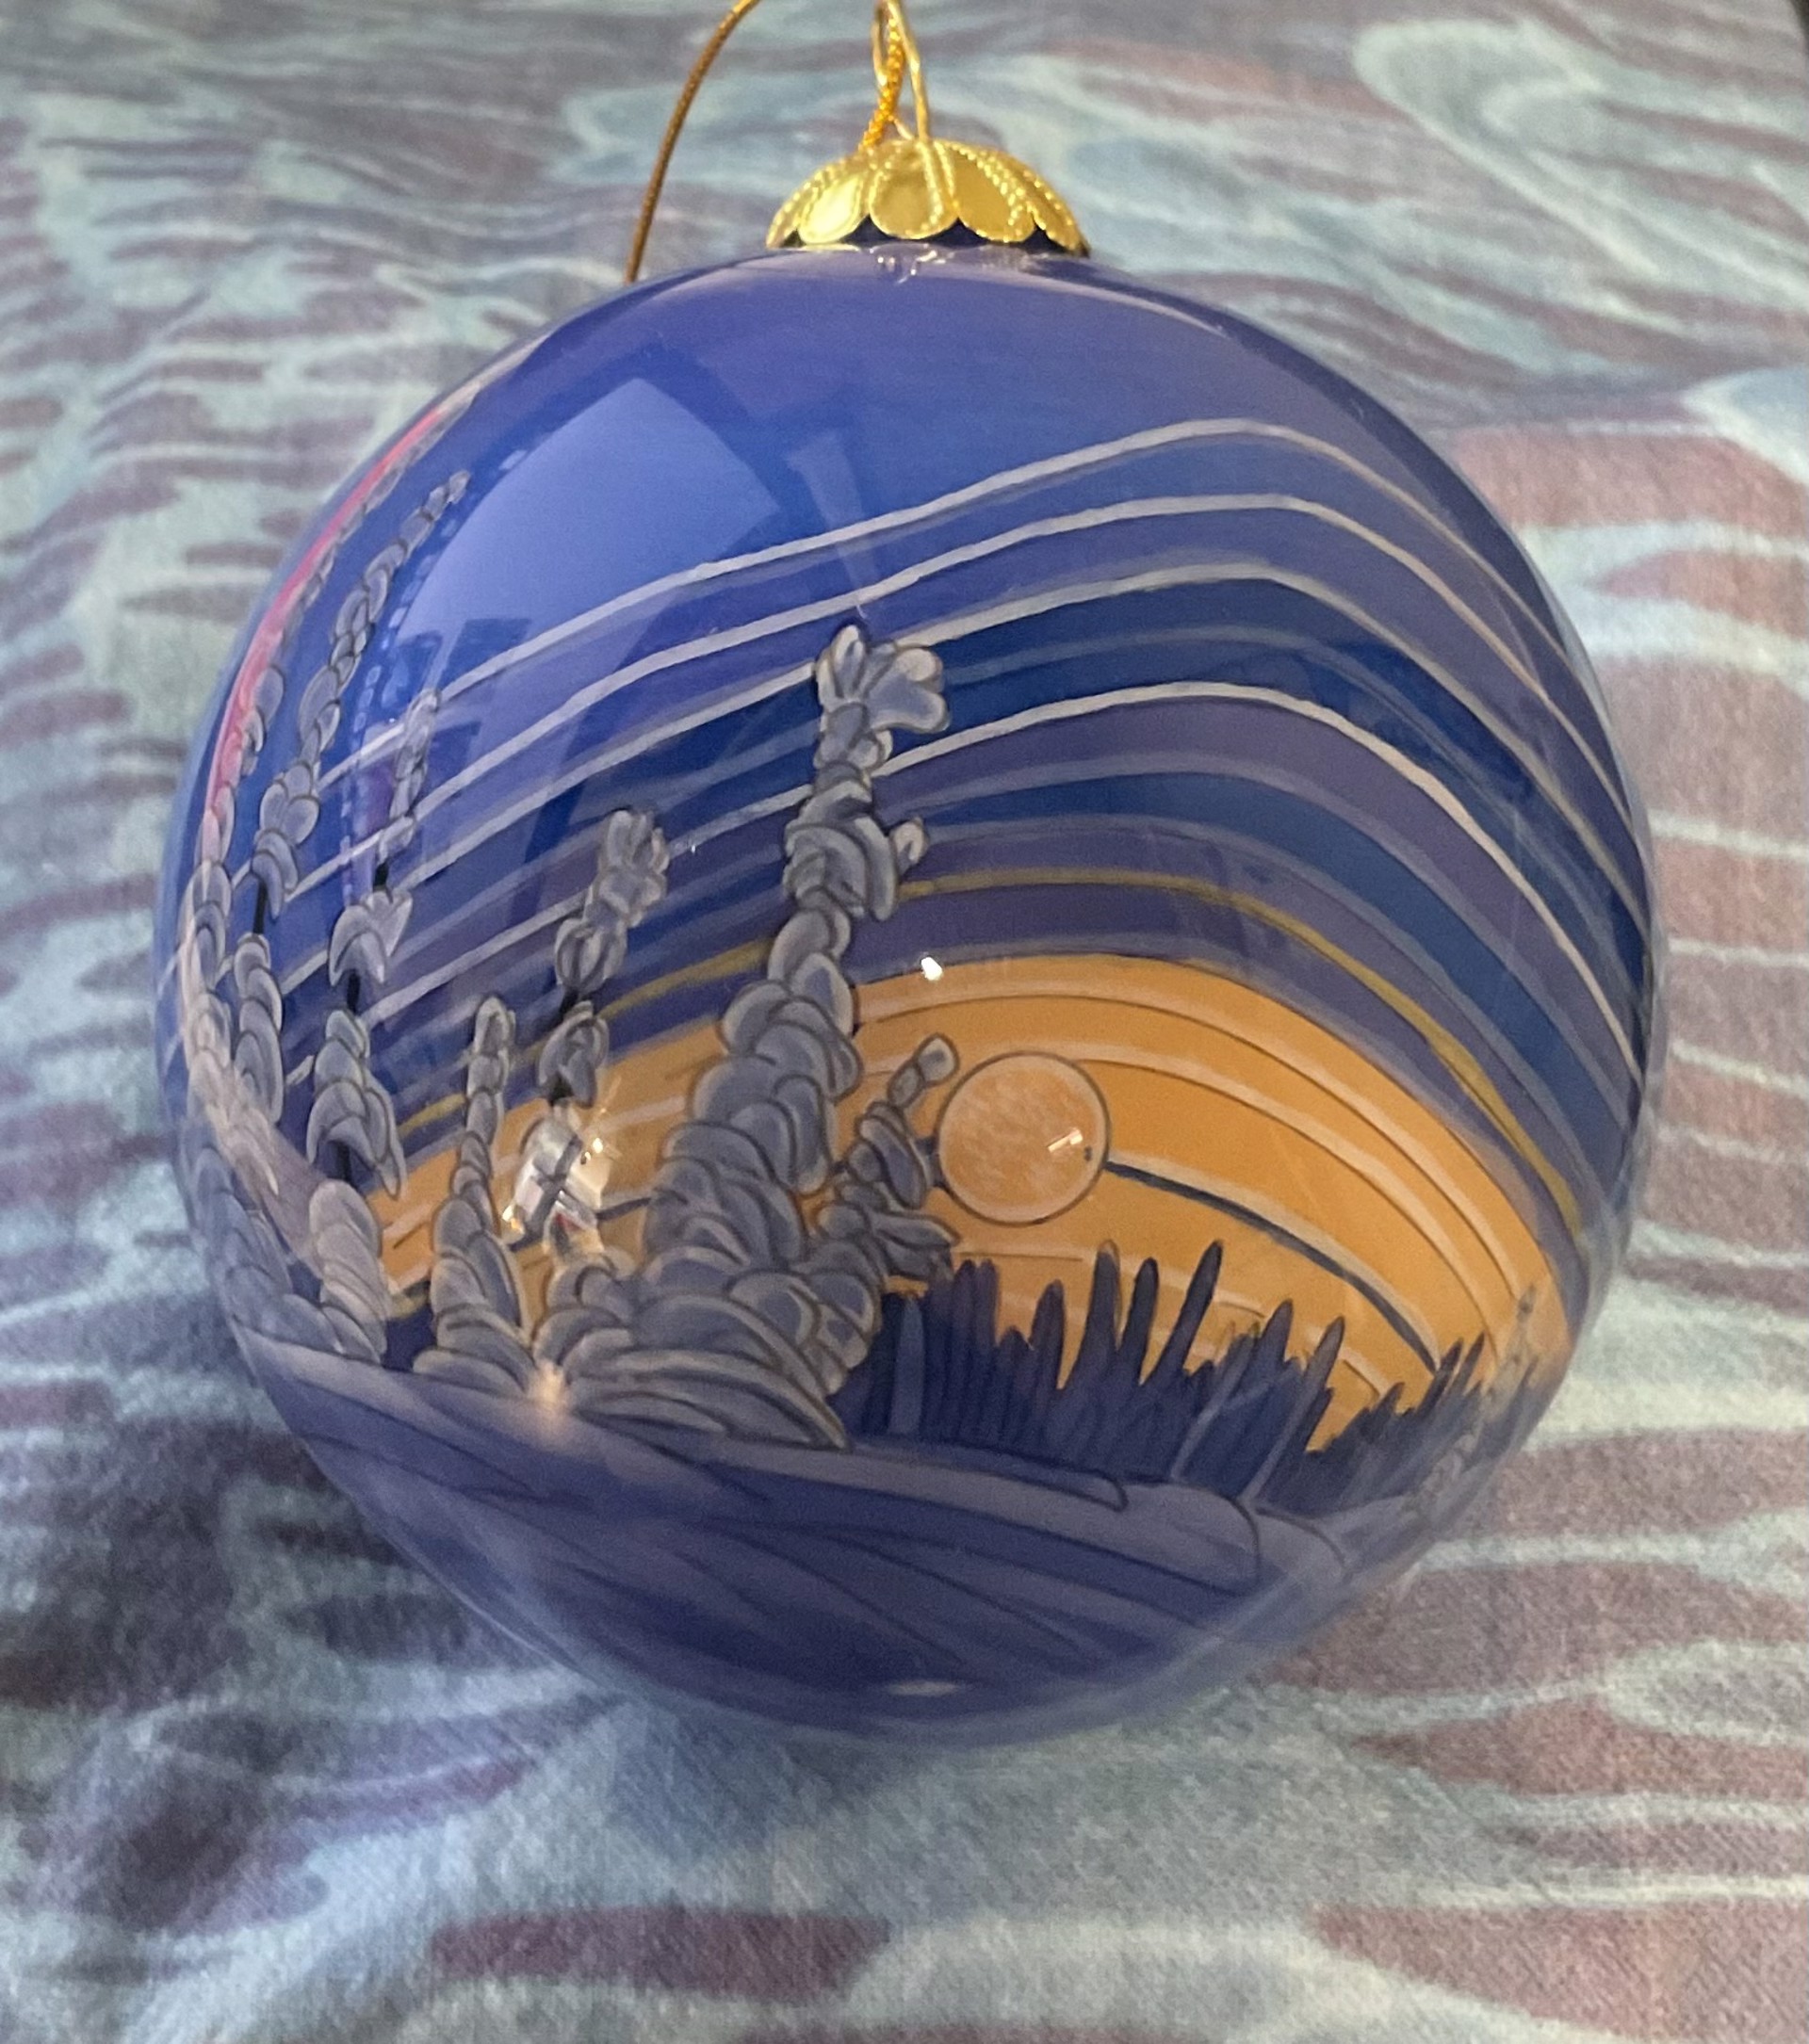 The Moon of Twilight Ornament by Robbie Craig